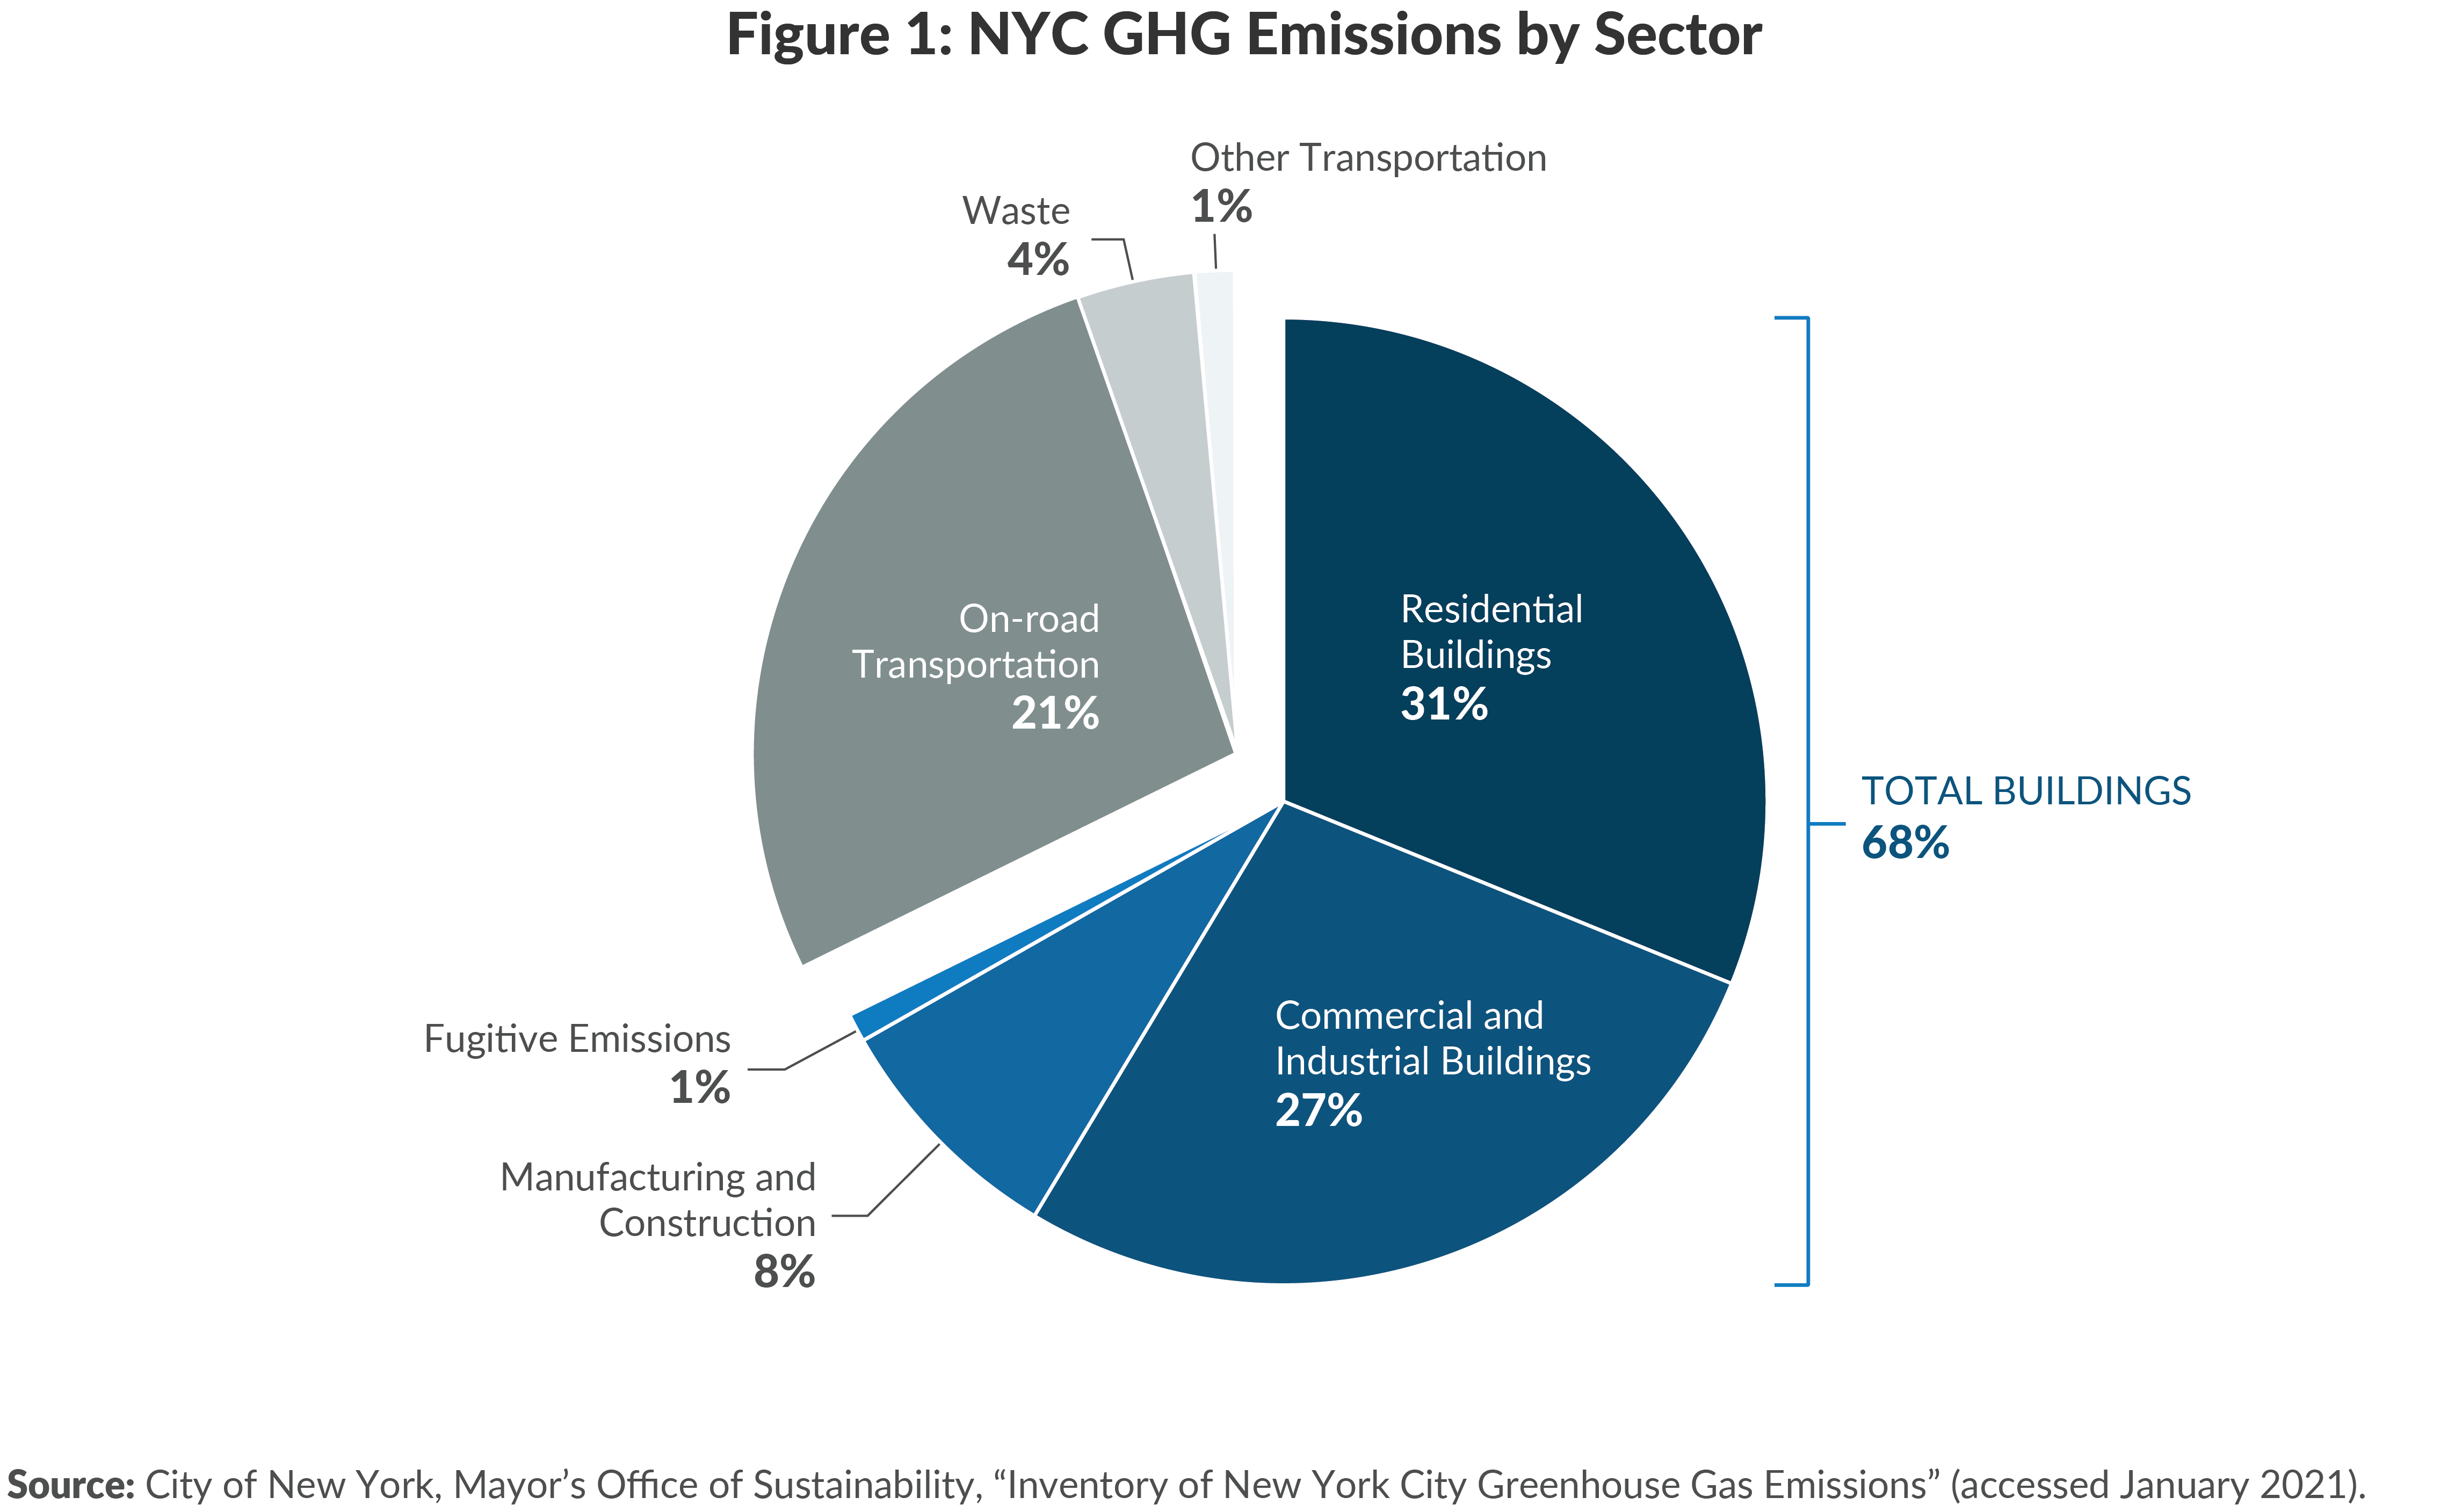 Figure 1. NYC GHG Emissions by Sector